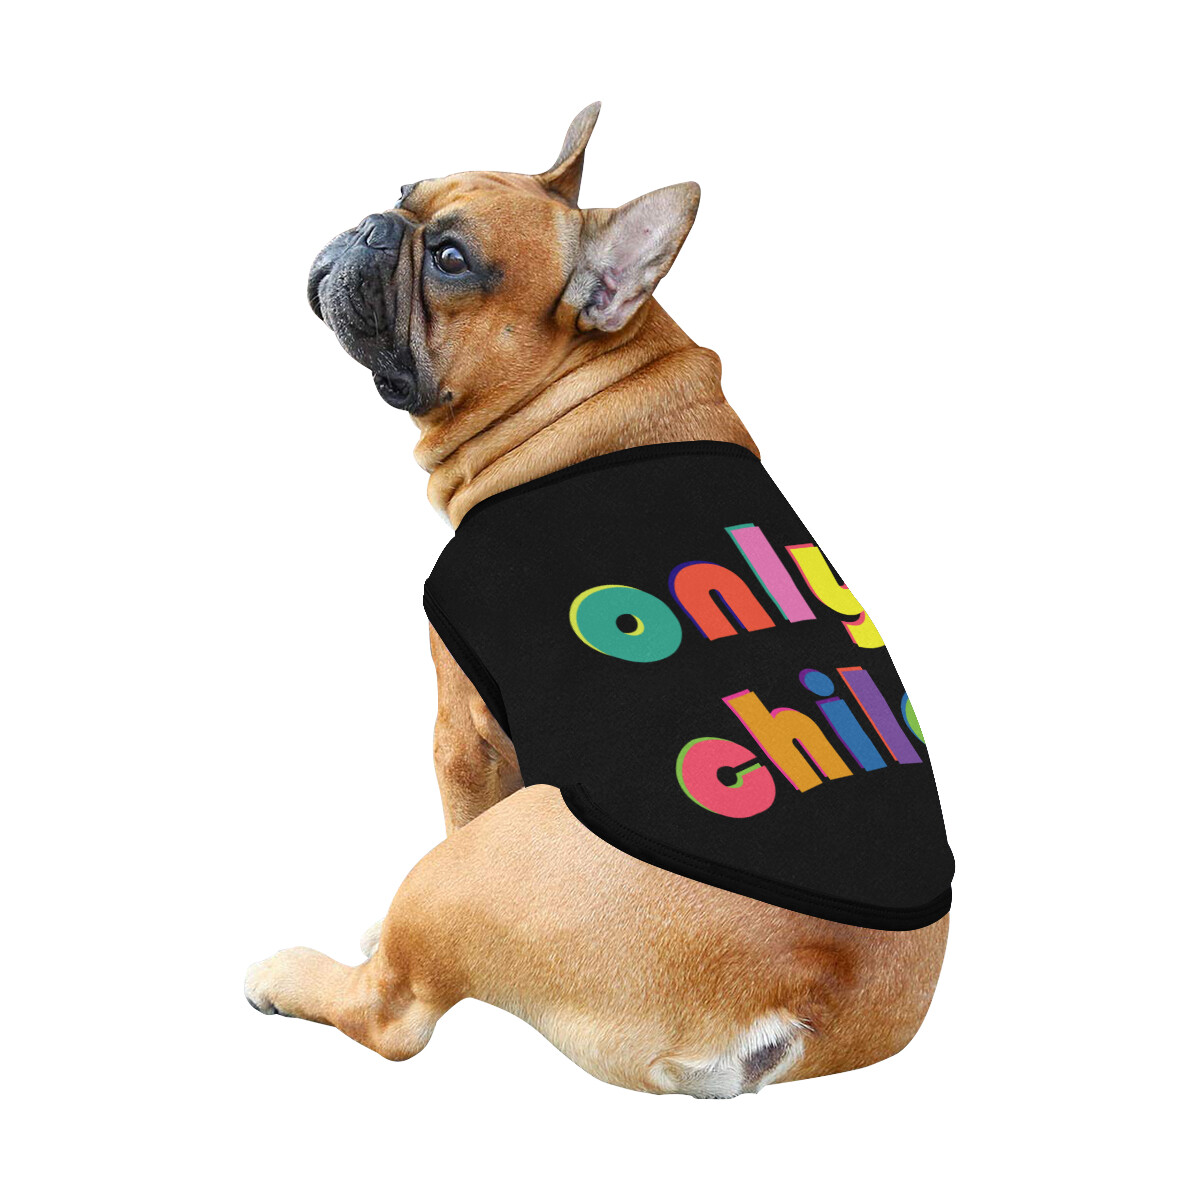 🐕 Only Child Dog Tank Top, Dog shirt, Dog clothes, Gifts, front back print, 7 sizes XS to 3XL, dog t-shirt, dog t-shirt, dog gift, black